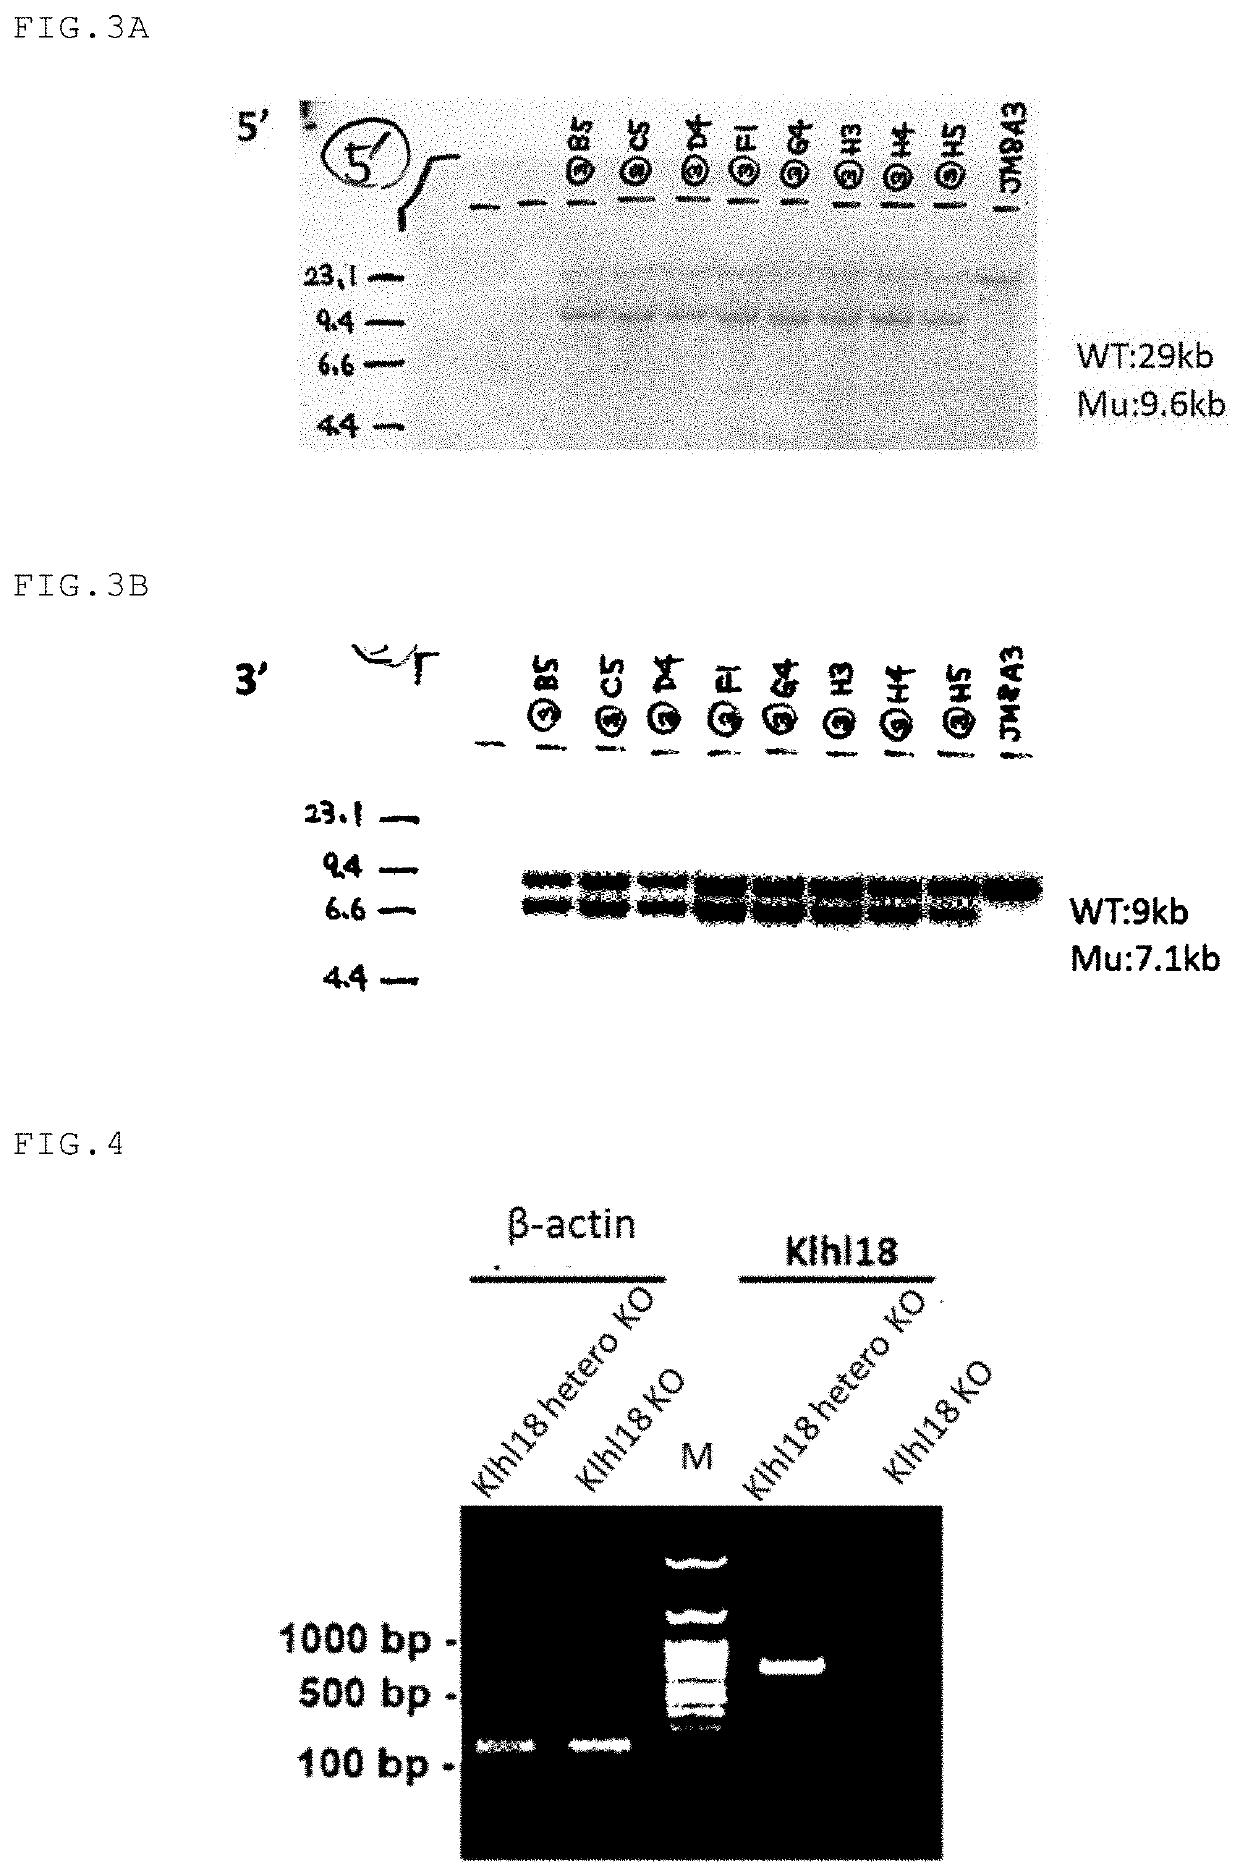 Agent for inhibiting or reducing light sensitivity